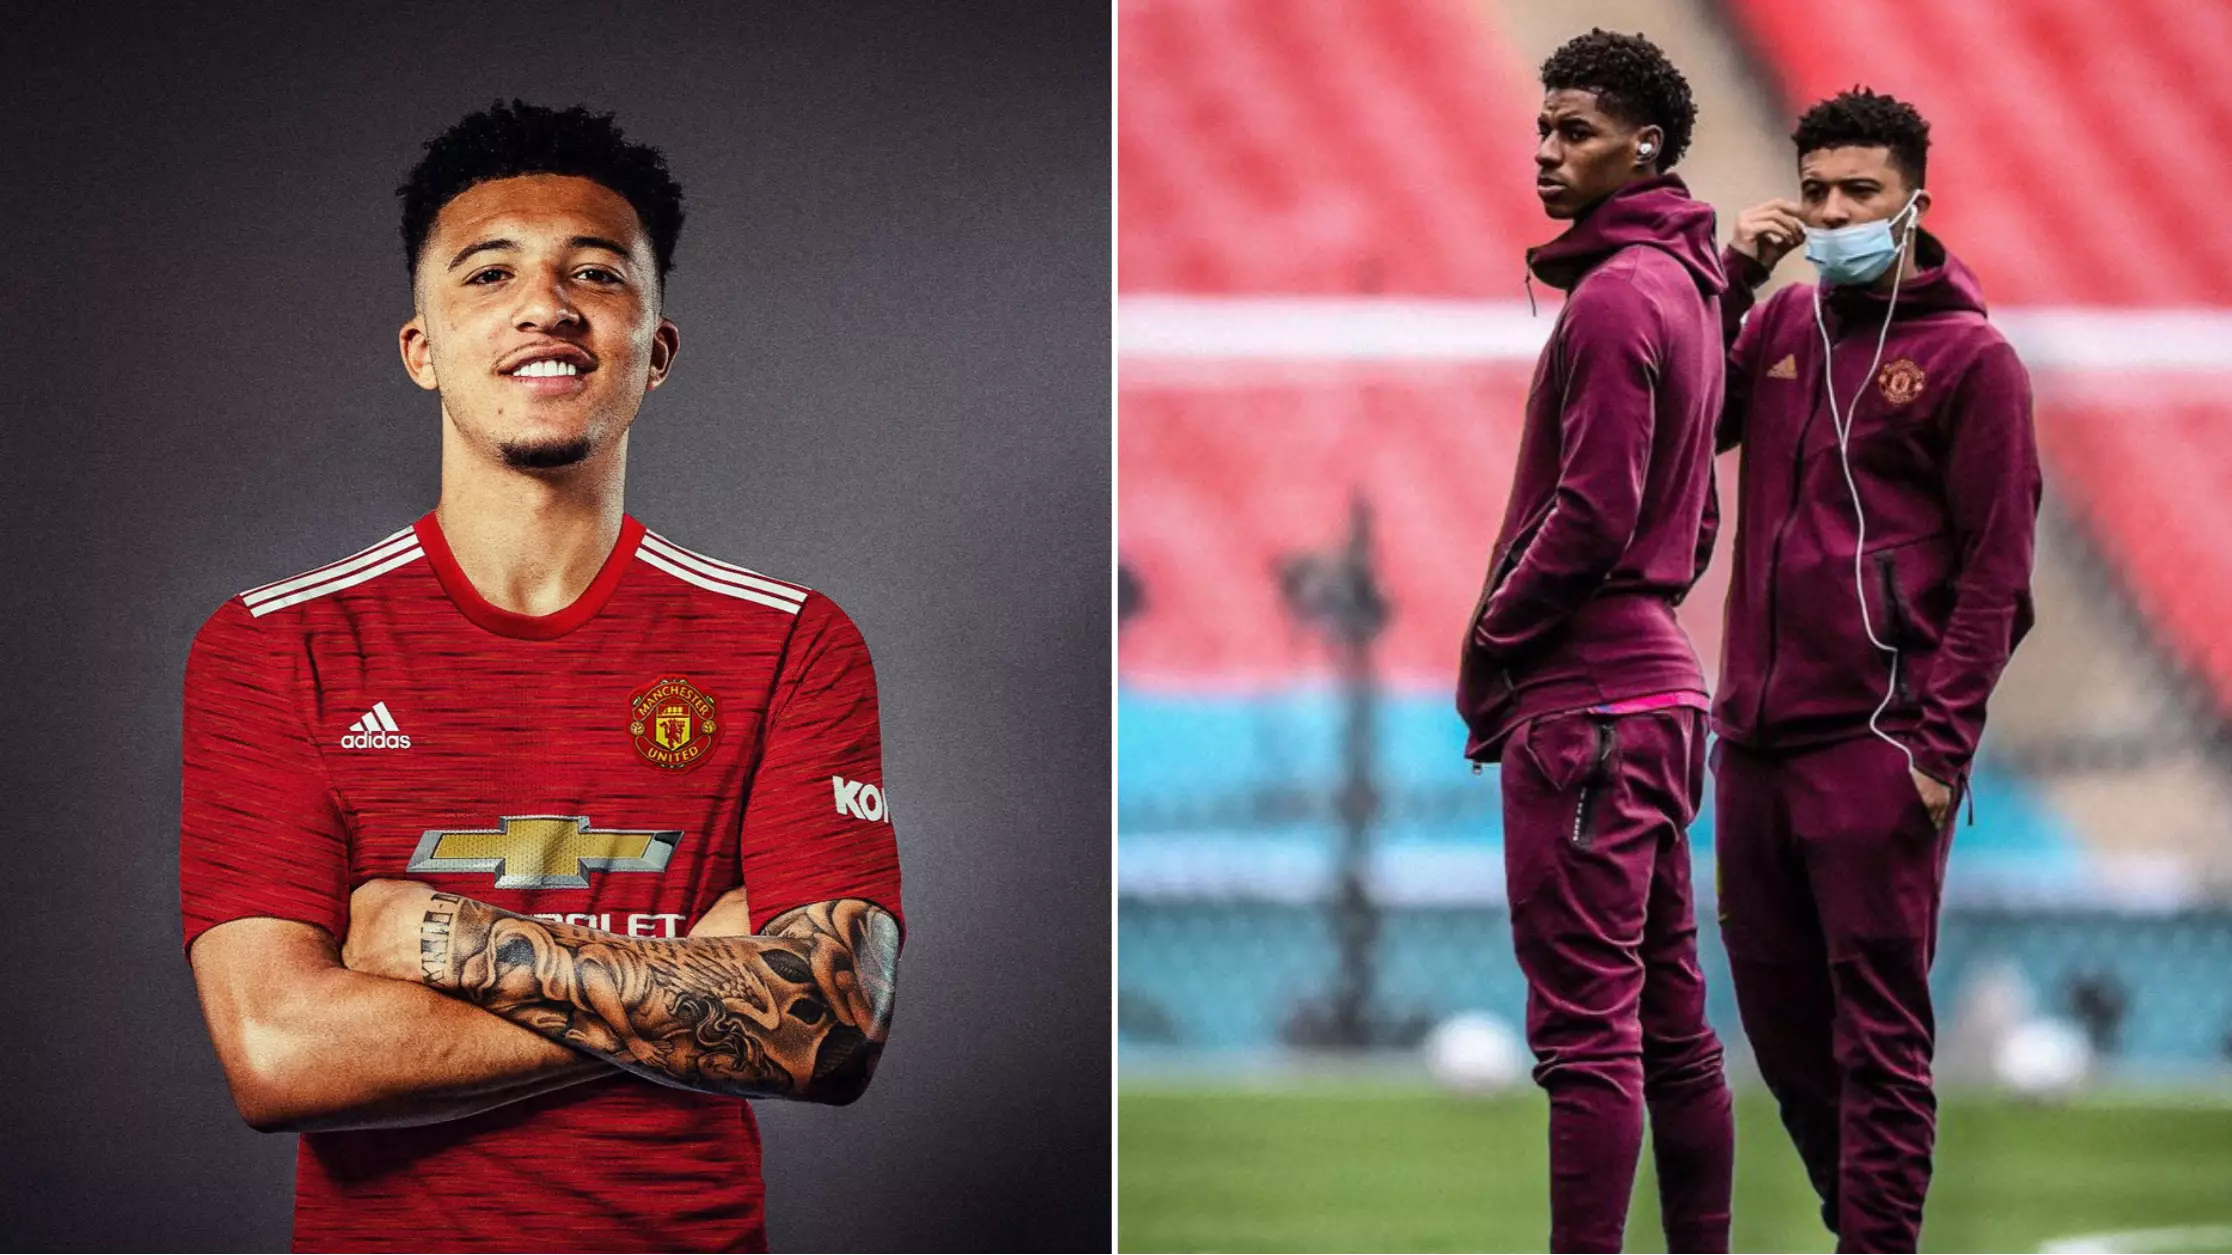 Manchester United Confirm Deal Has Been Agreed For Jadon Sancho, Marcus Rashford Reacts